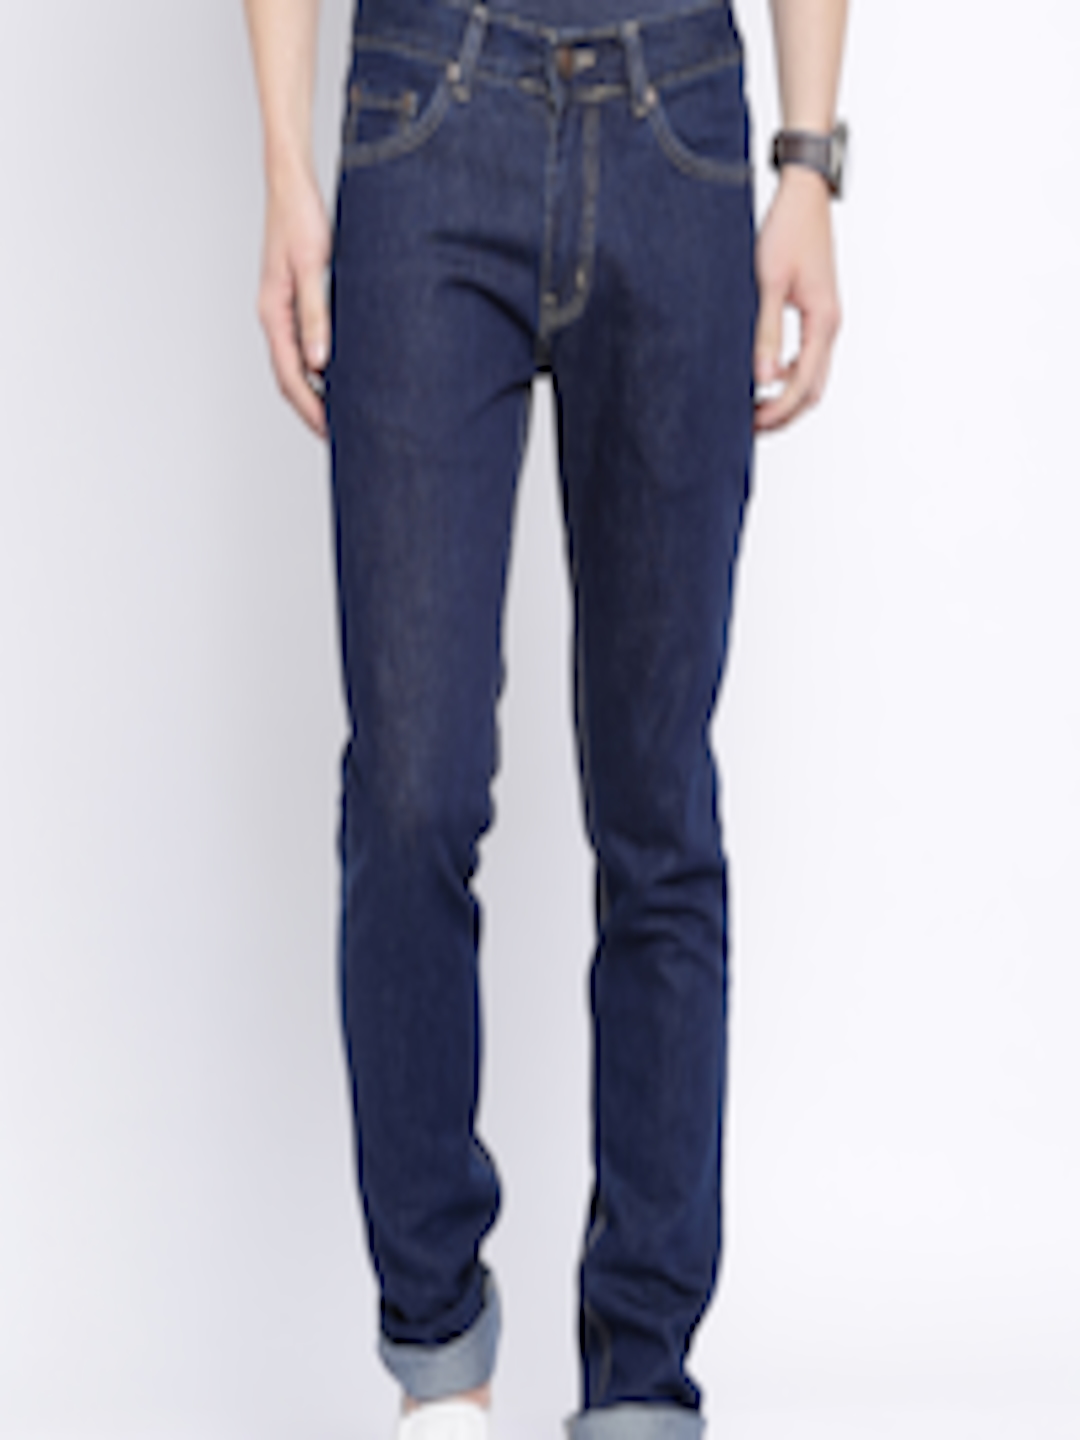 Buy American Crew Blue Jeans - Jeans for Men 1426112 | Myntra